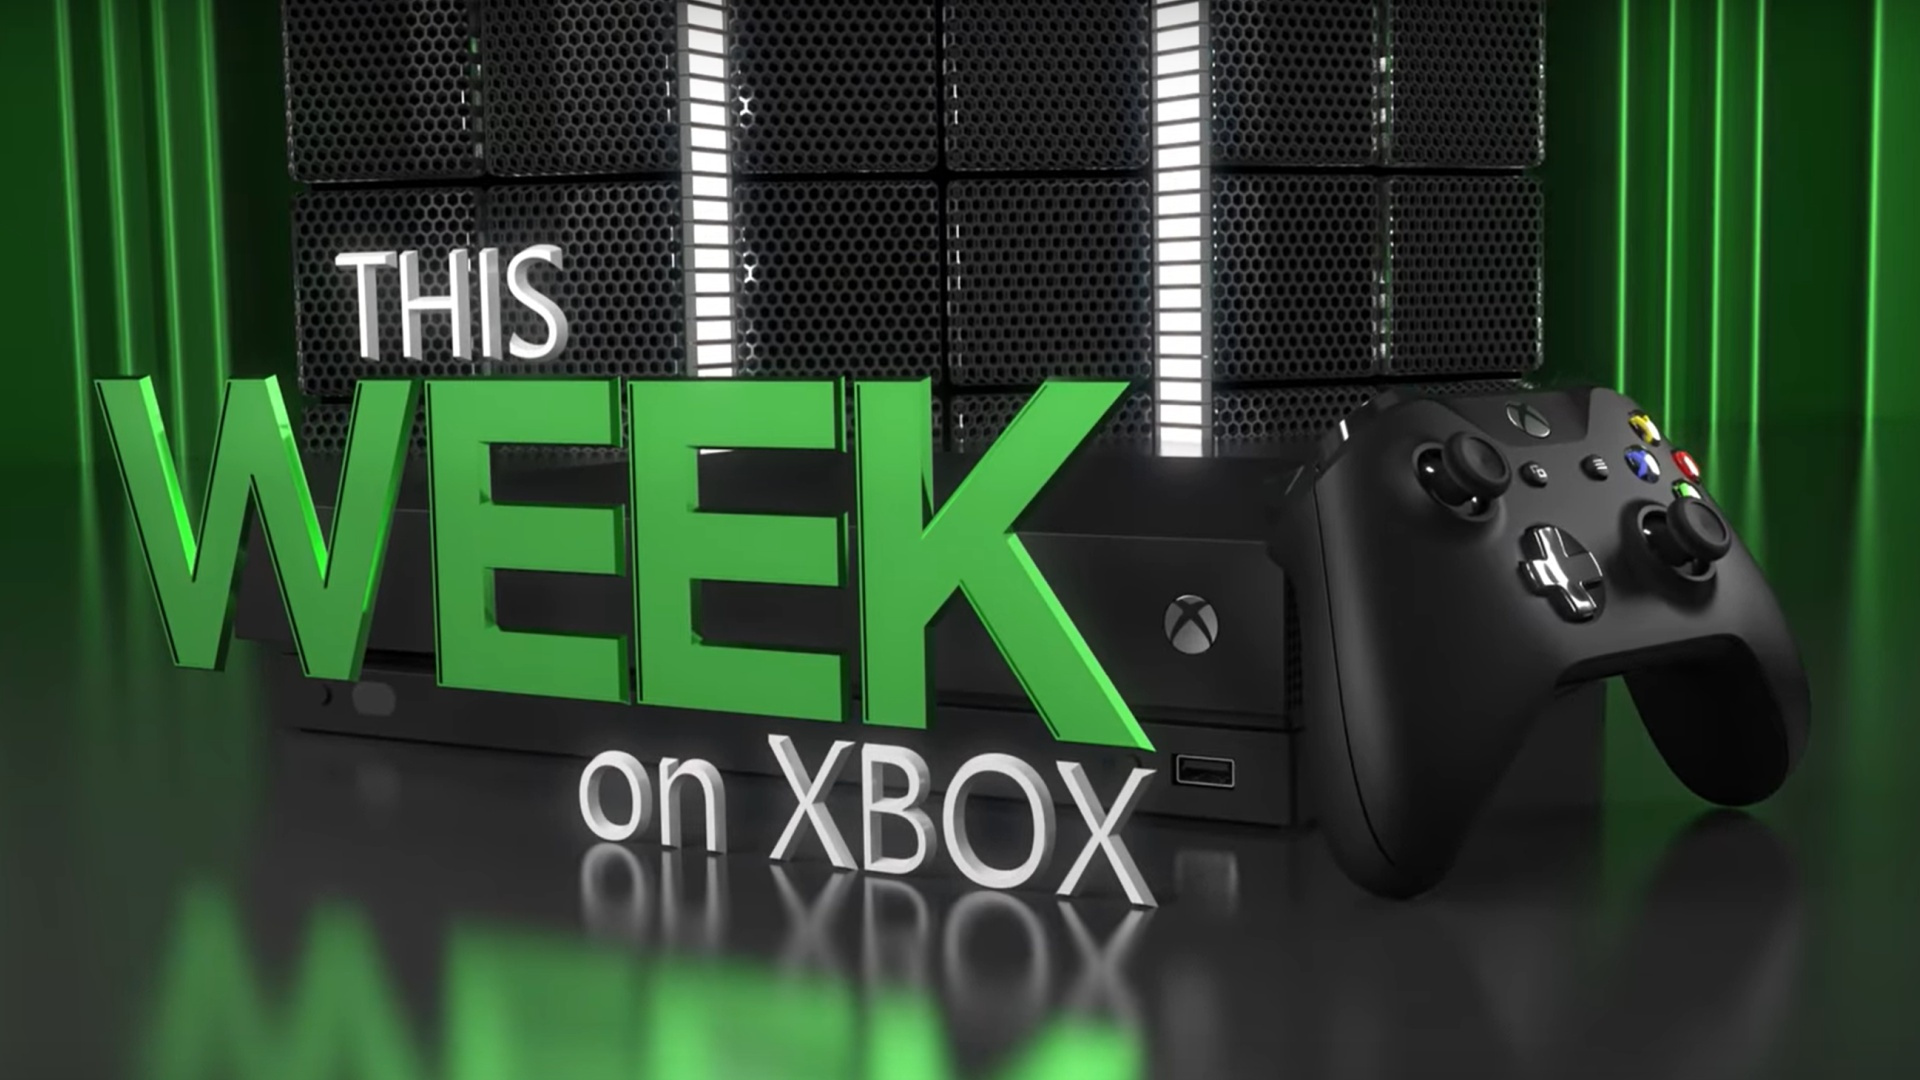 This Week On Xbox July 3 2020 - robloxs heroes event soars into action on xbox one xbox wire